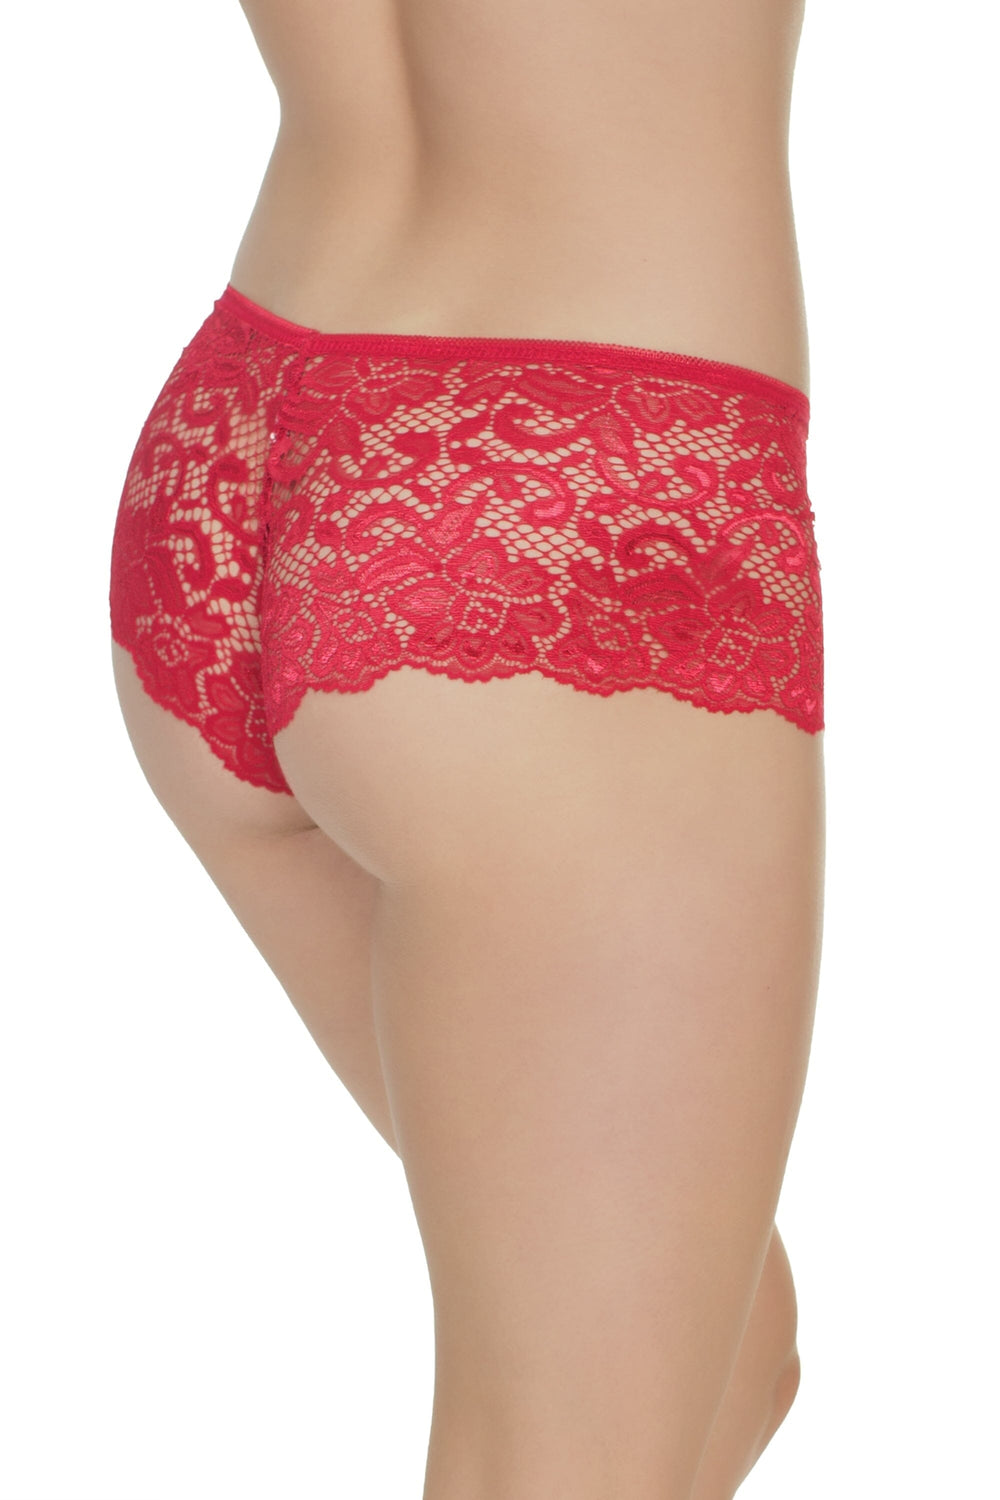 Low Rise Lace Booty Short-Booty Shorts-Coquette-Red-O/S-SEXYSHOES.COM